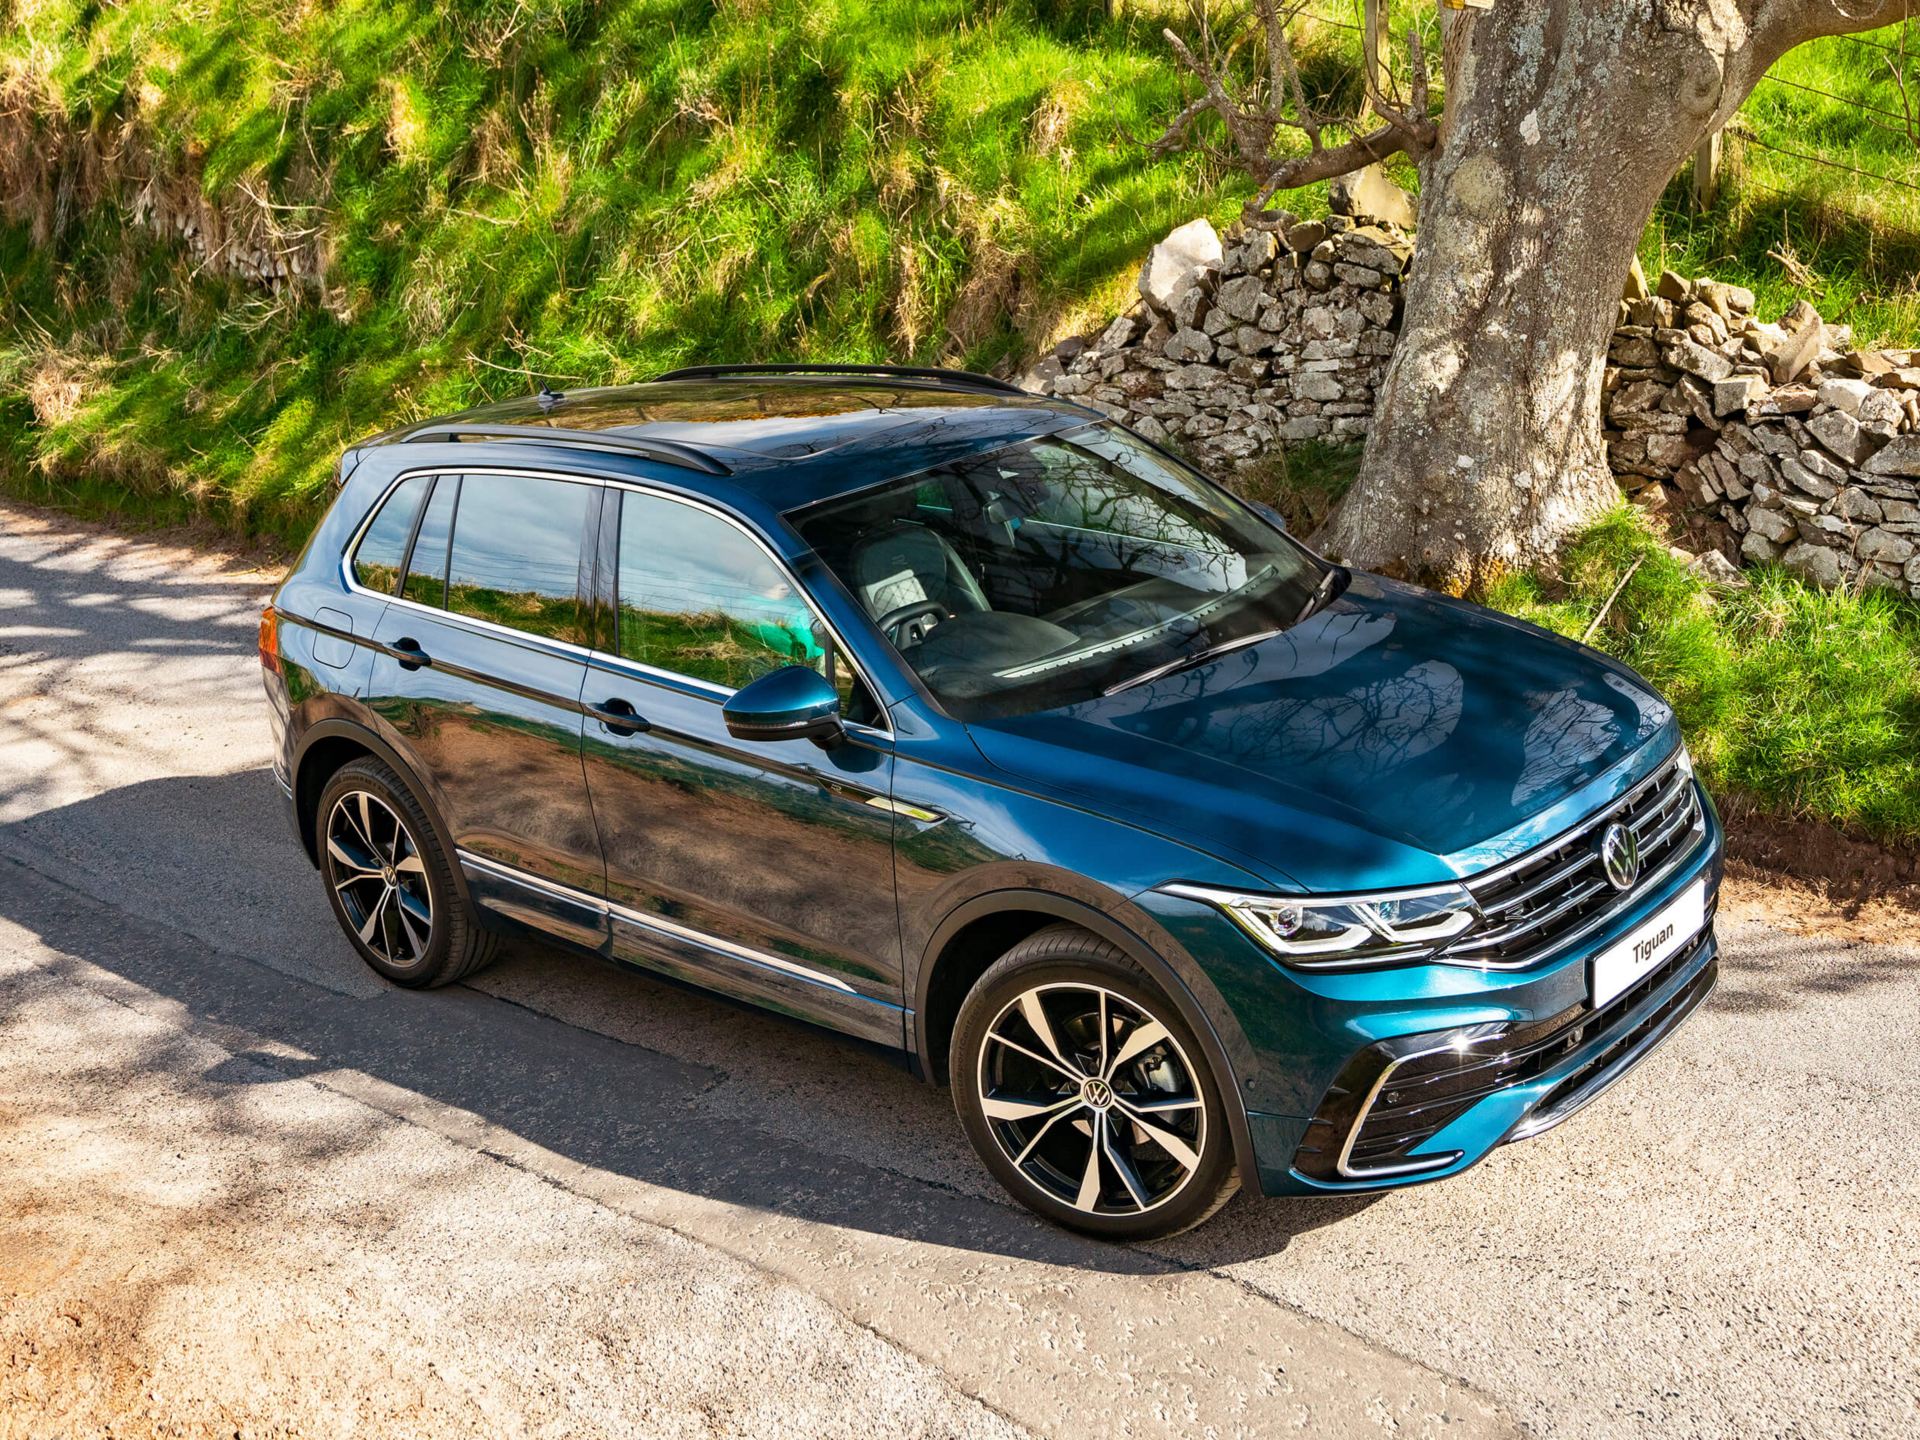 side view of blue volkswagen tiguan with silver alloy wheels parked under a tree